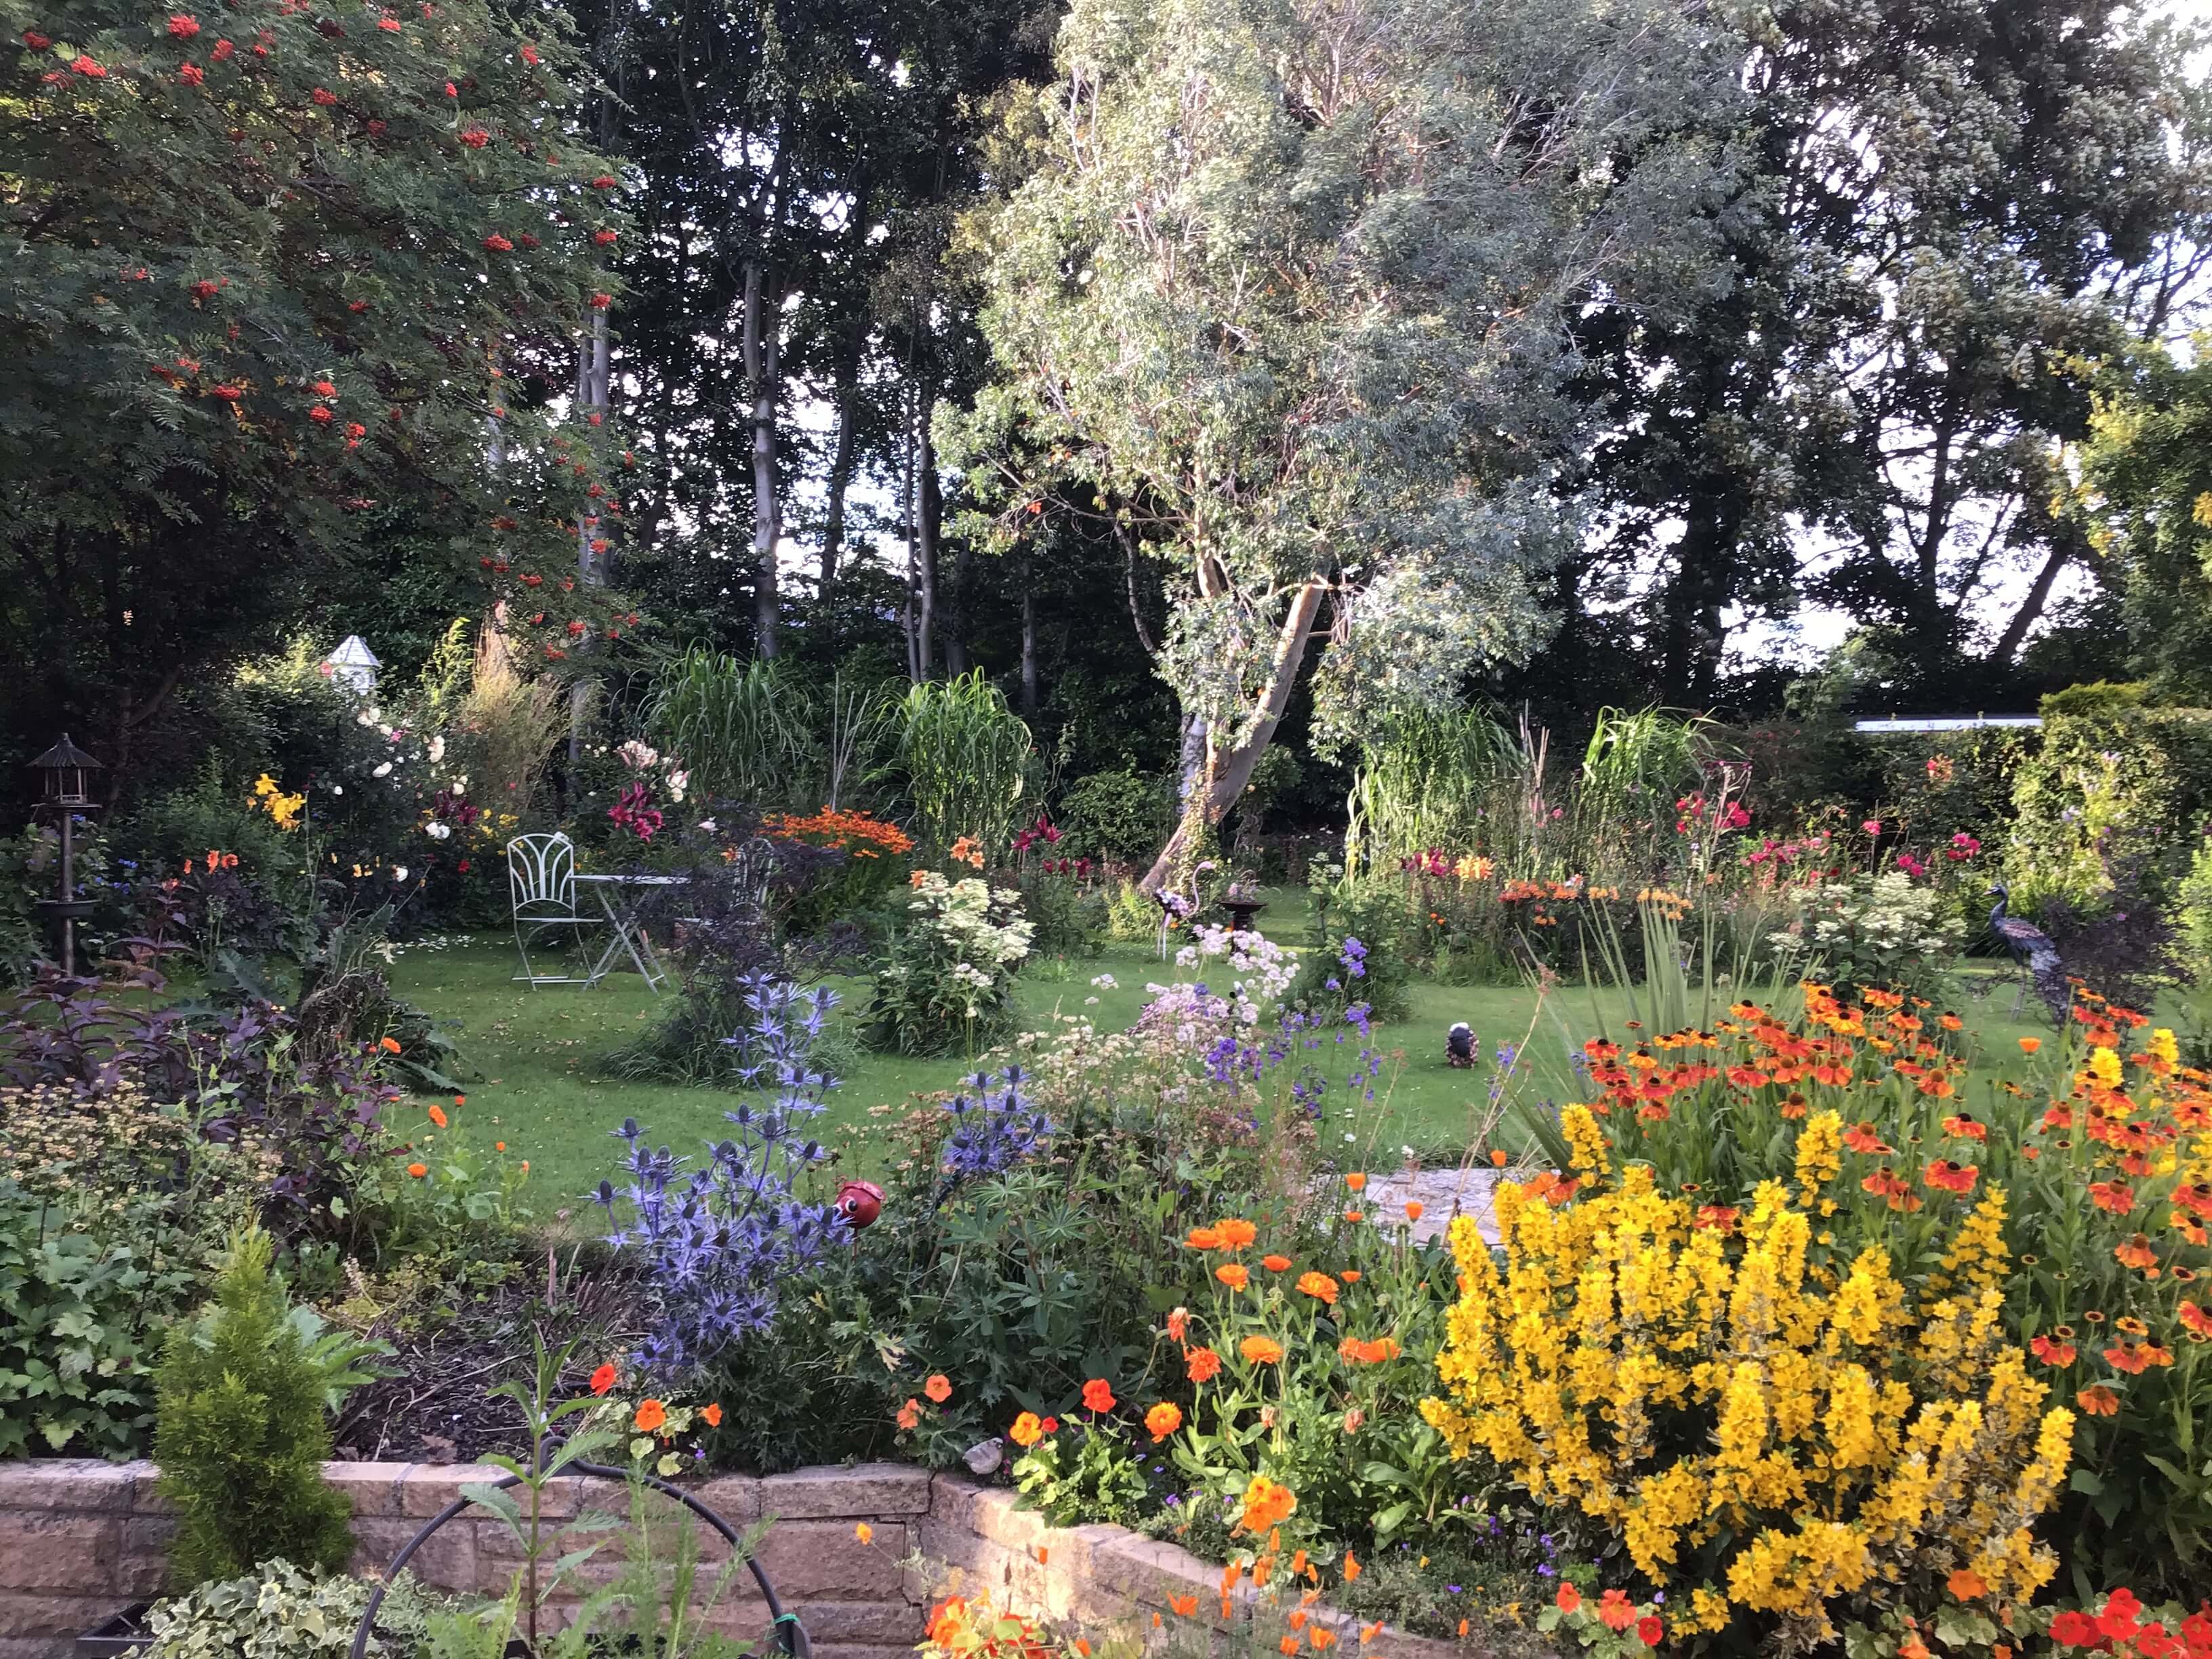 Here’s our floral back garden which was originally all lawn. We have been so fortunate having this space to enjoy during lockdown